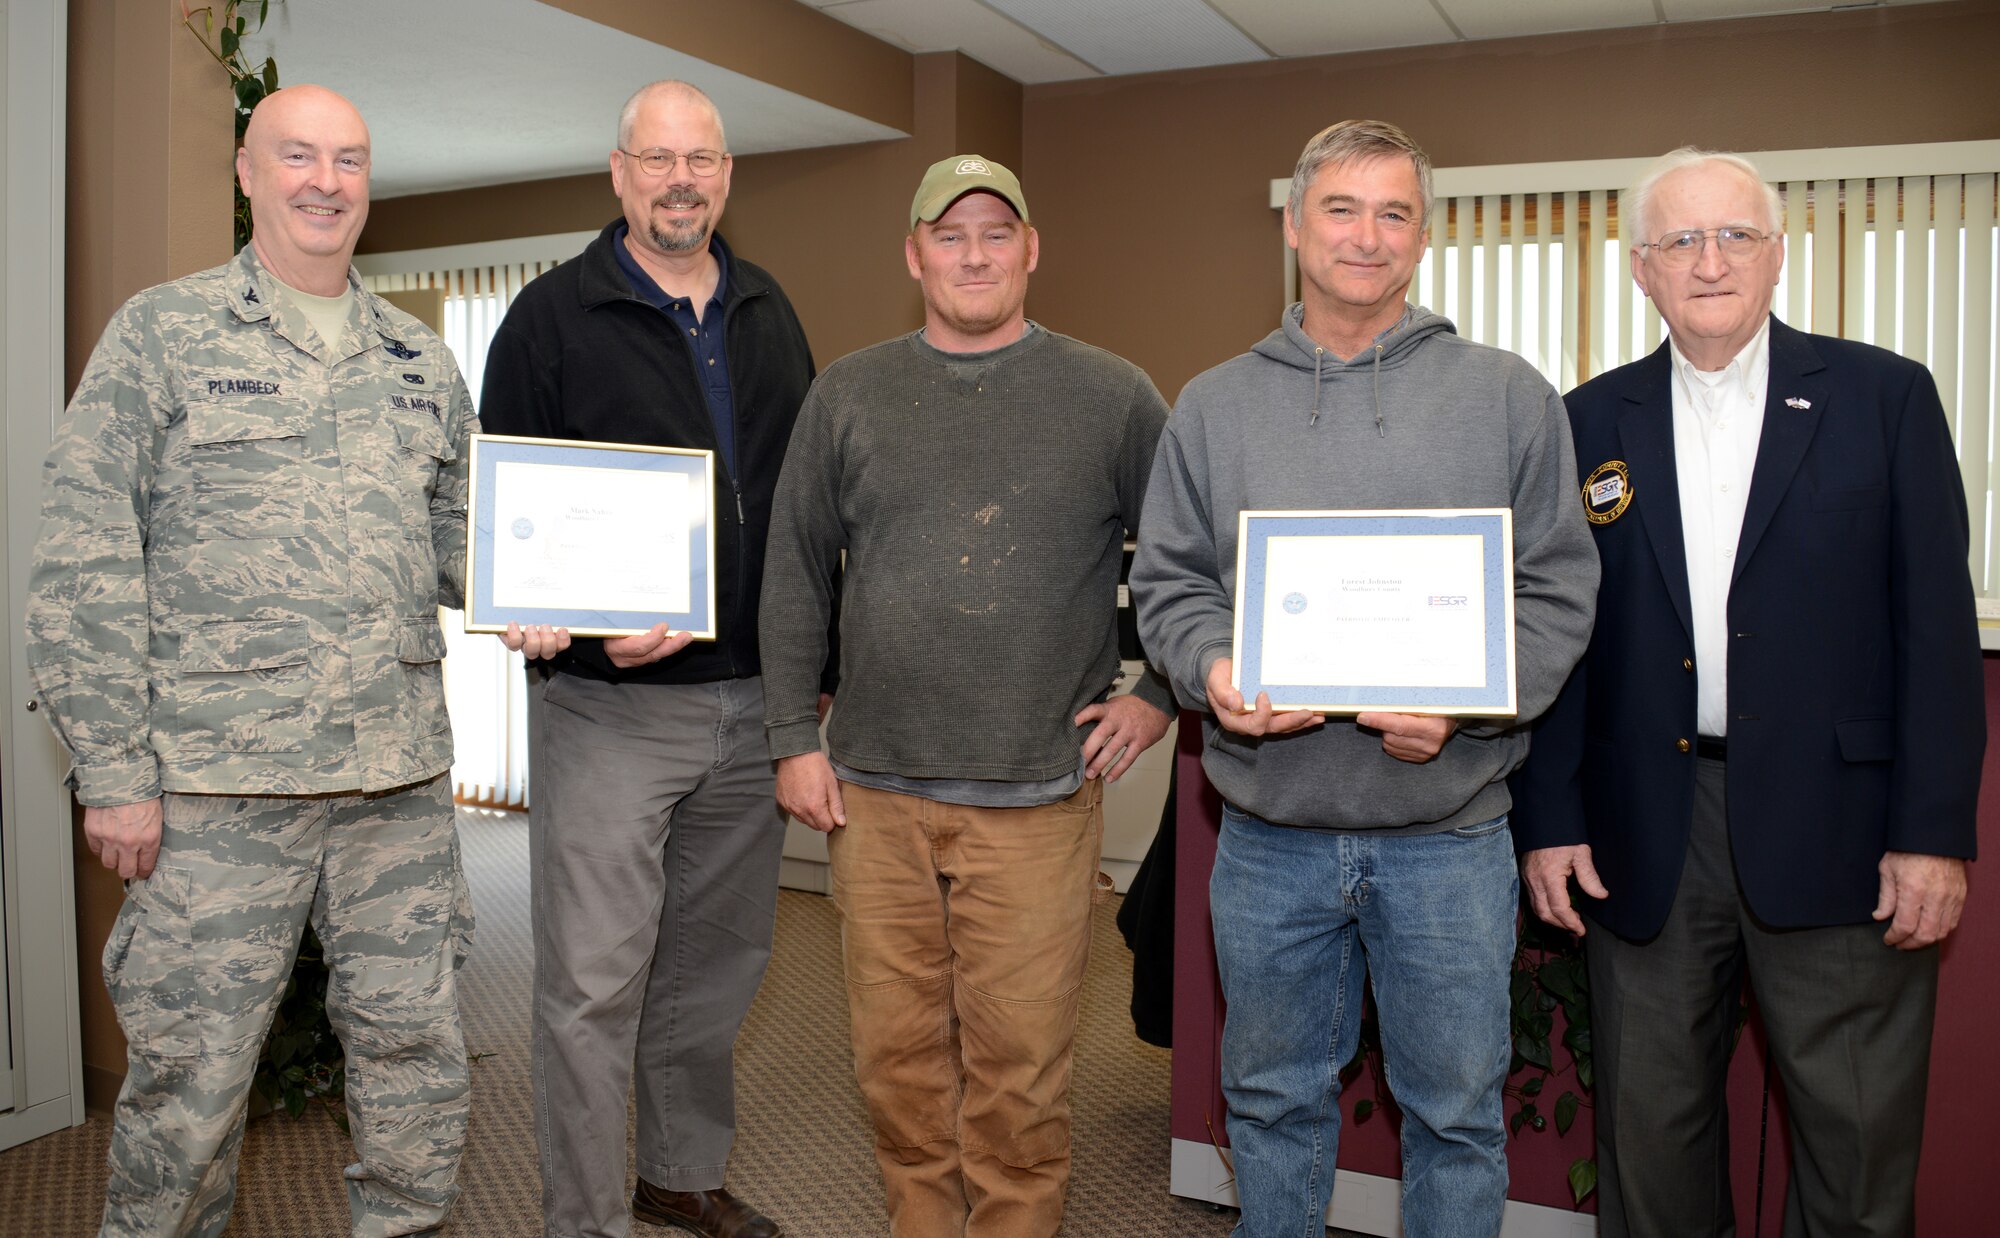 Employee Support of the Guard and Reserve  representative Mr. Larry Harrington (right) along with Col. Scott Plambeck, Iowa Air National Guard (left) present an ESGR “Patriotic Employer” award to Mr. Mark Nahra and Mr. Forest Johnston of the Woodbury County Engineers office in Moville, IA on Wednesday April 13, 2016. Nahra and Johnston were nominated for the award by Senior Airman Pete McDermott (center). McDermott works full time for Woodbury County, but also serves as a member of the Iowa Air National Guard with the 185th Air Refueling Wing in Sioux City, IA. (U.S. Air National Guard photo by Master Sgt. Vincent De Groot/Released)